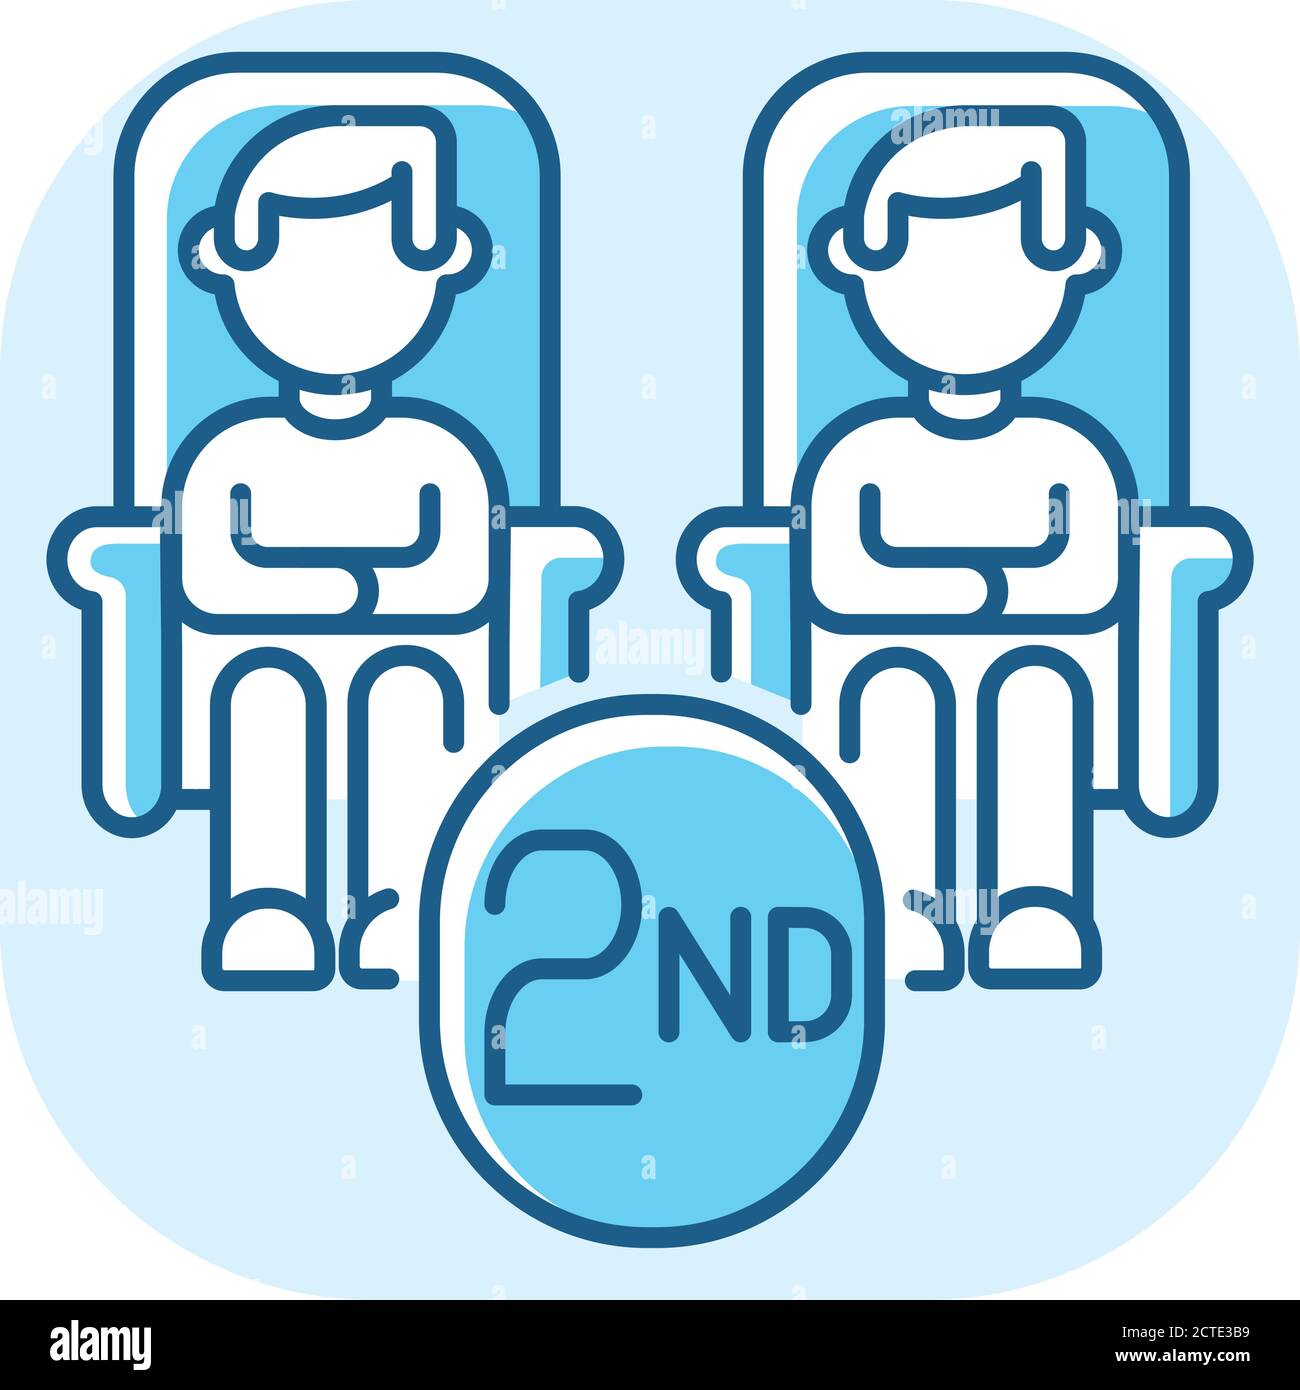 Second class seats blue RGB color icon Stock Vector